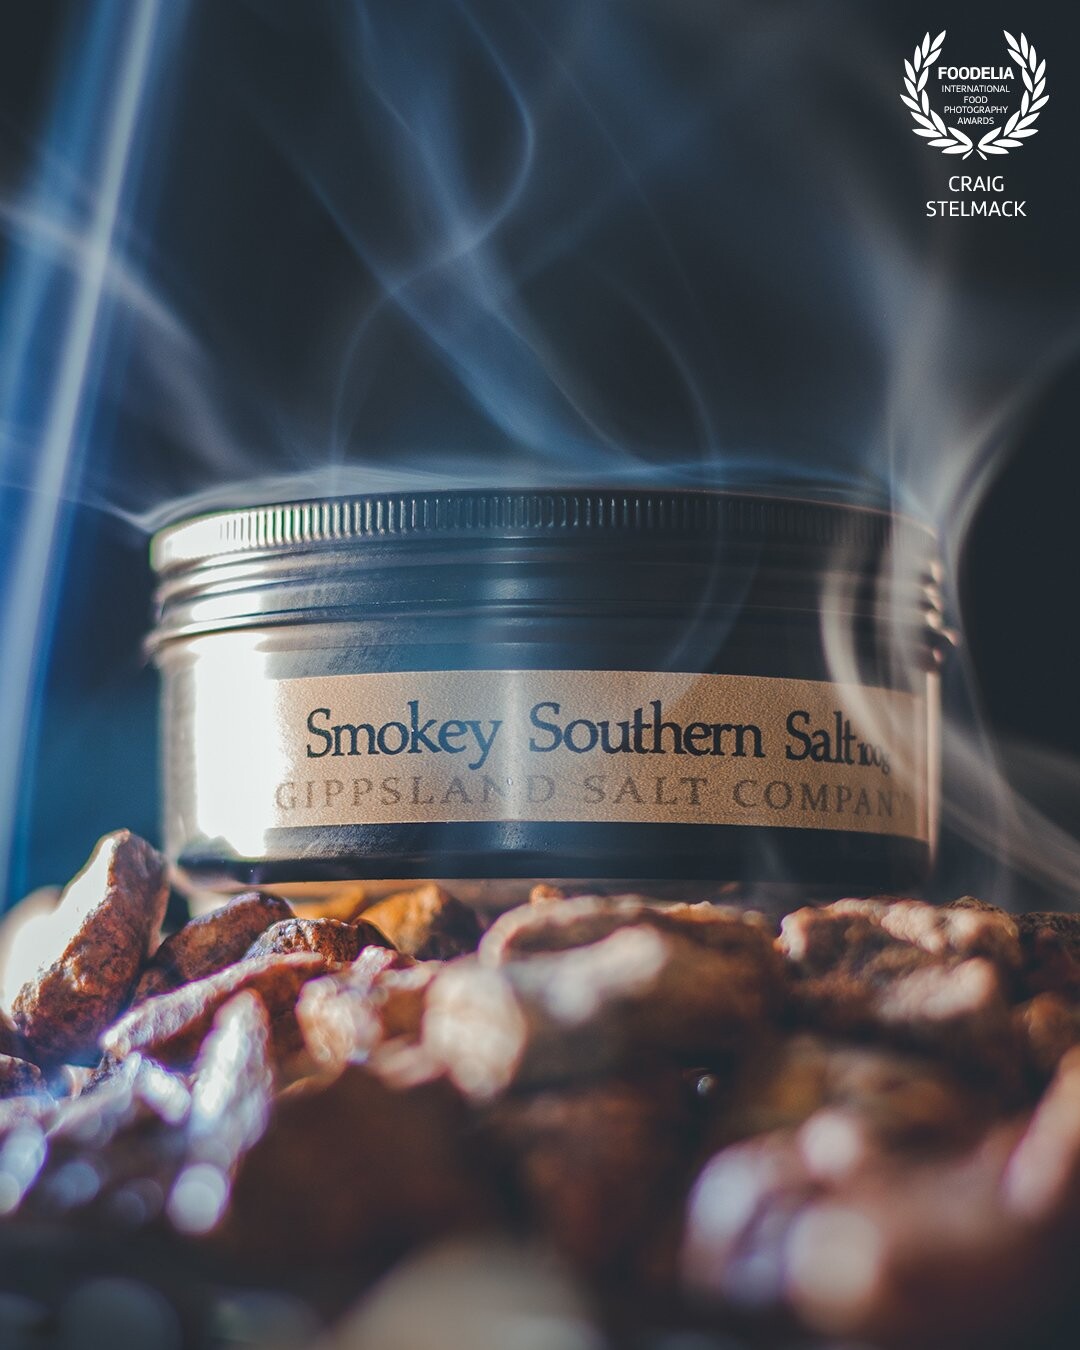 A great local product in the shop of one of my clients.... good fun to shoot with the smoke, I think I shot more images that day than any other.